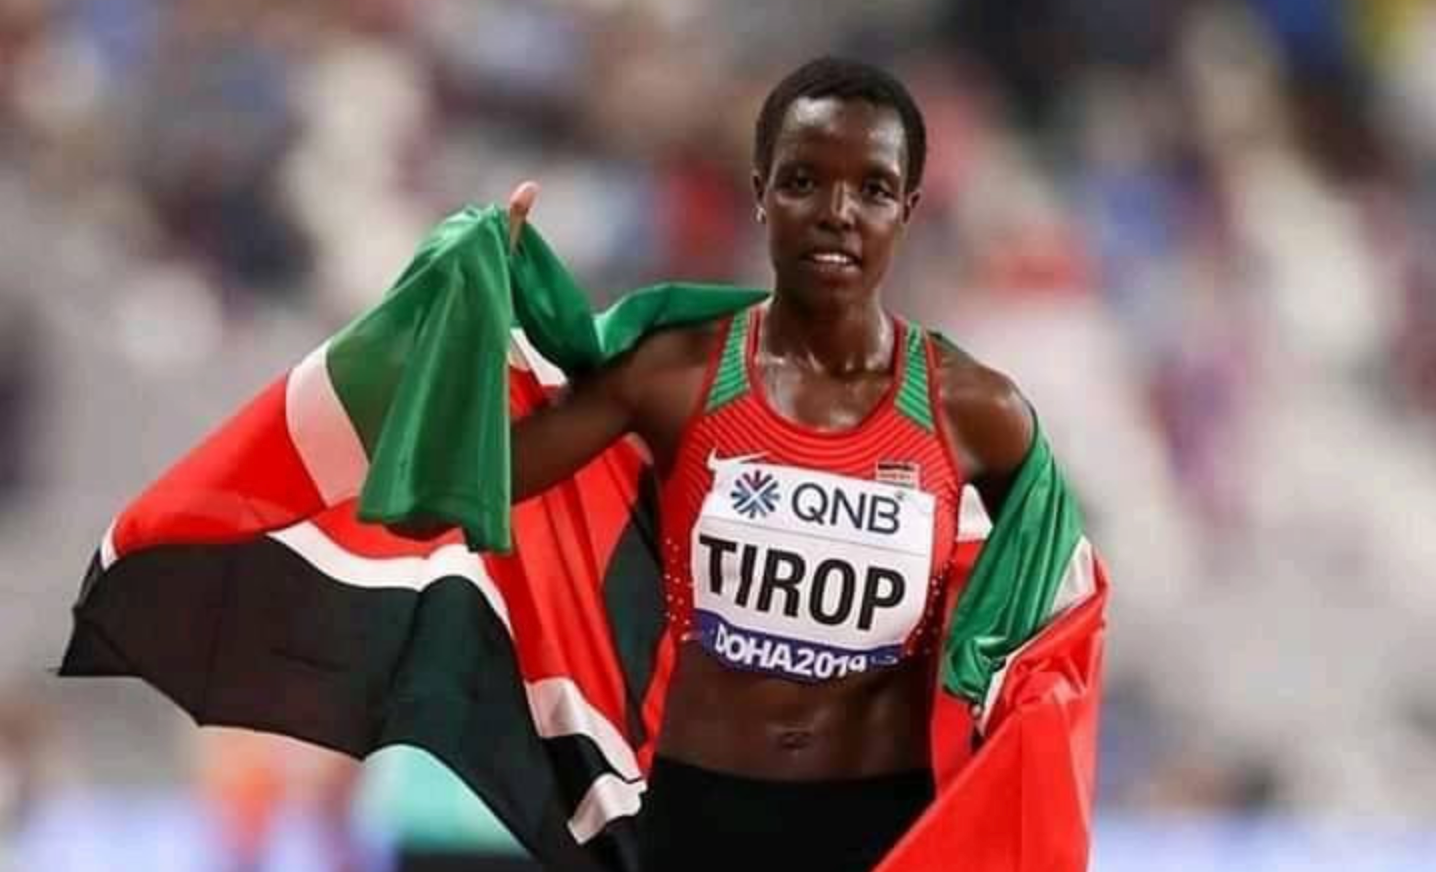 Kenya's Tokyo Olympic star and World Championship medallist, Agnes Tirop found dead with multiple knife wounds